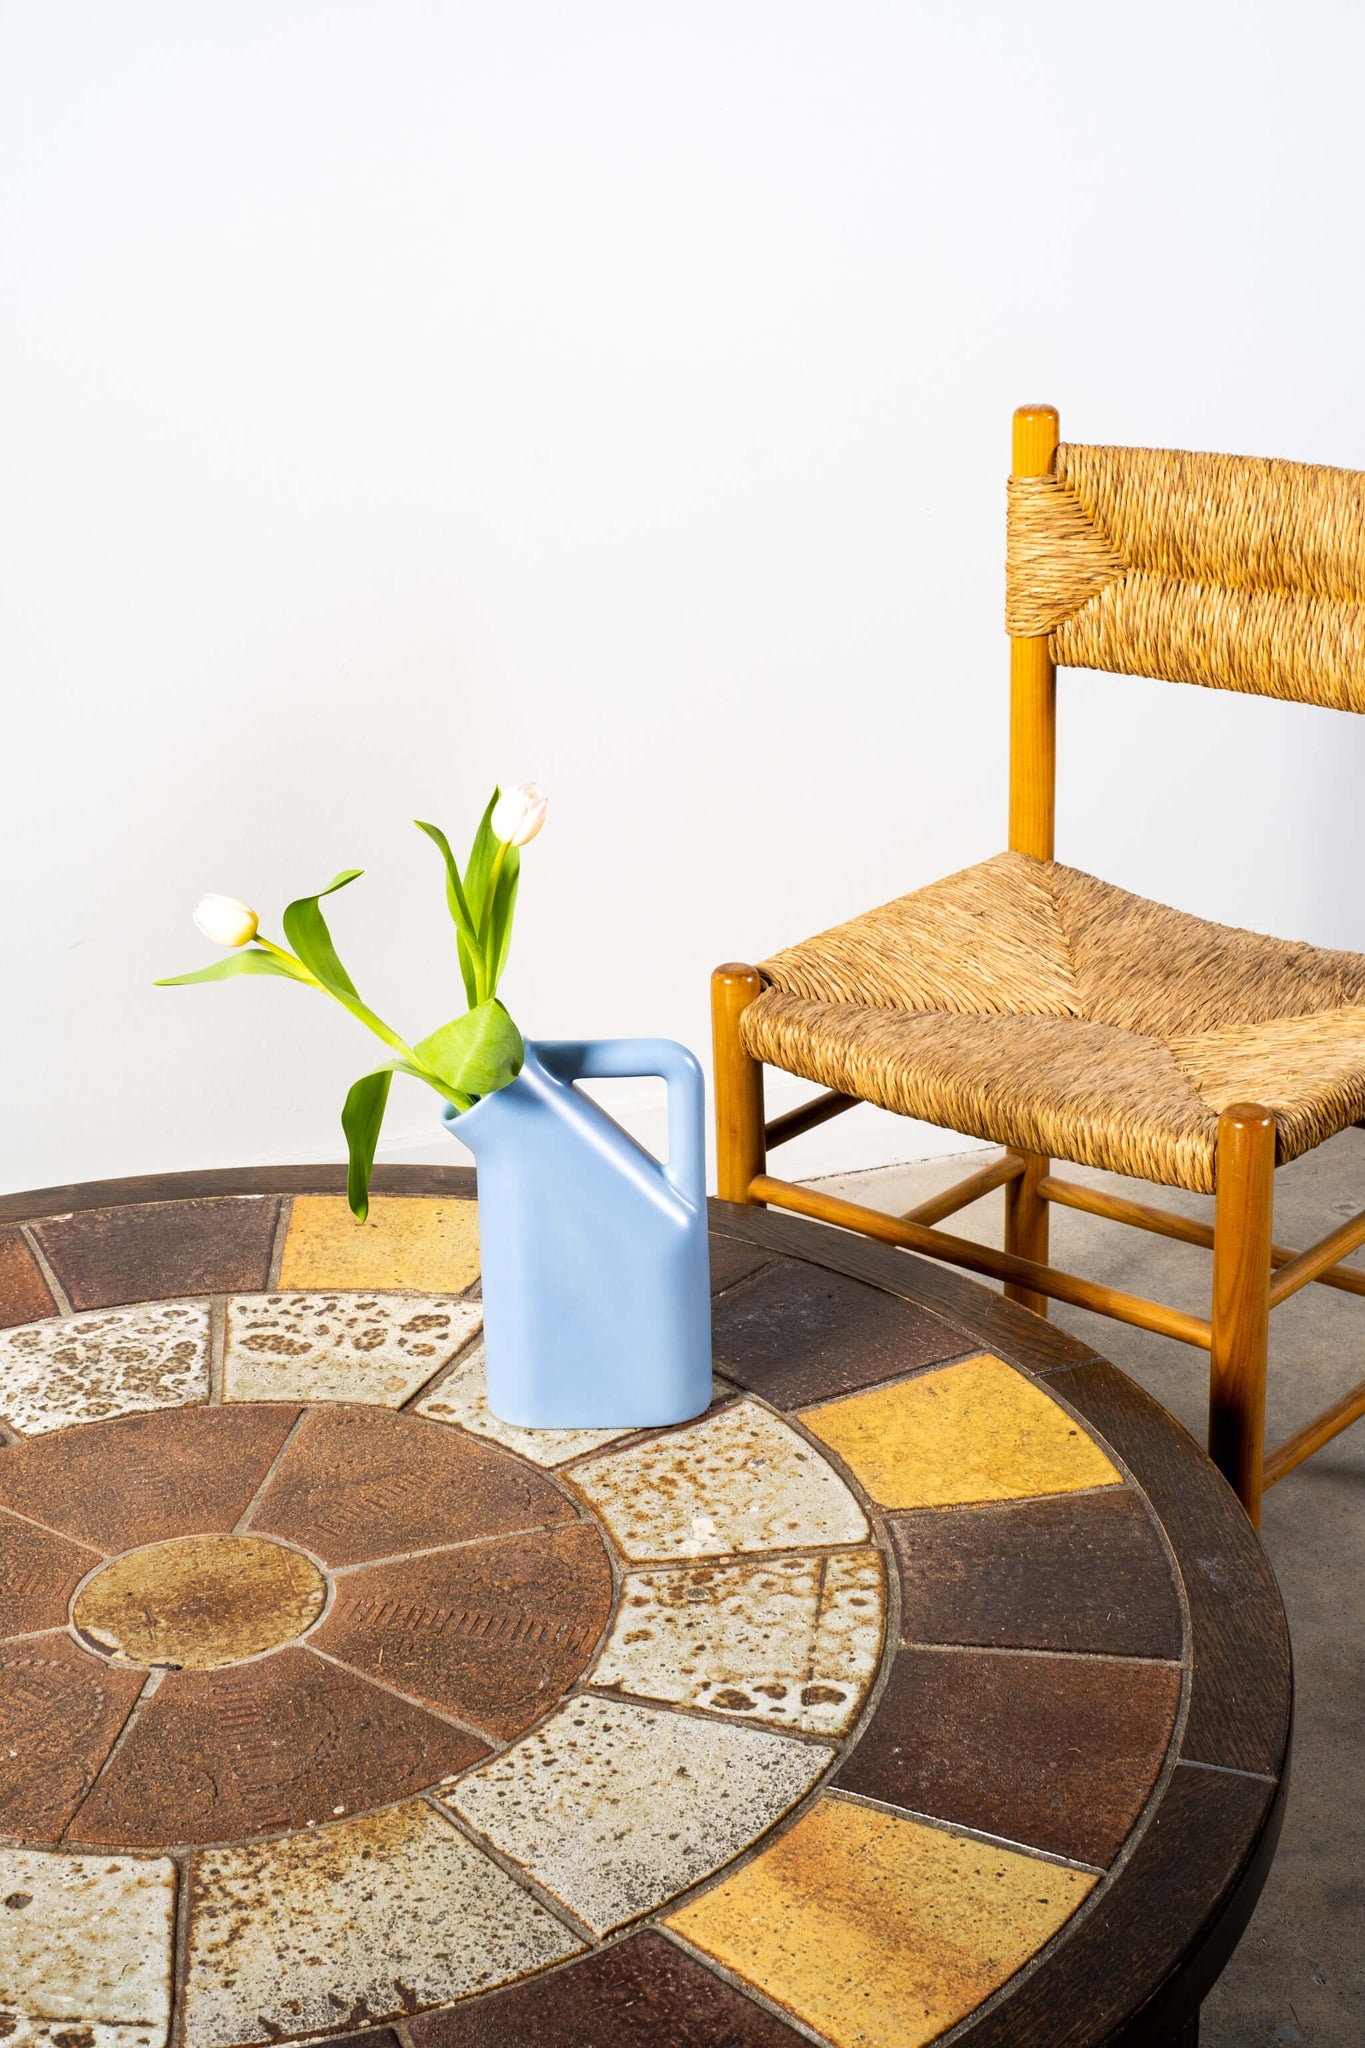 Vintage 1970s Tiled Top Coffee Table Tue Poulsen Haslev, shown with wood and jute chair ad a blue vase with tulips